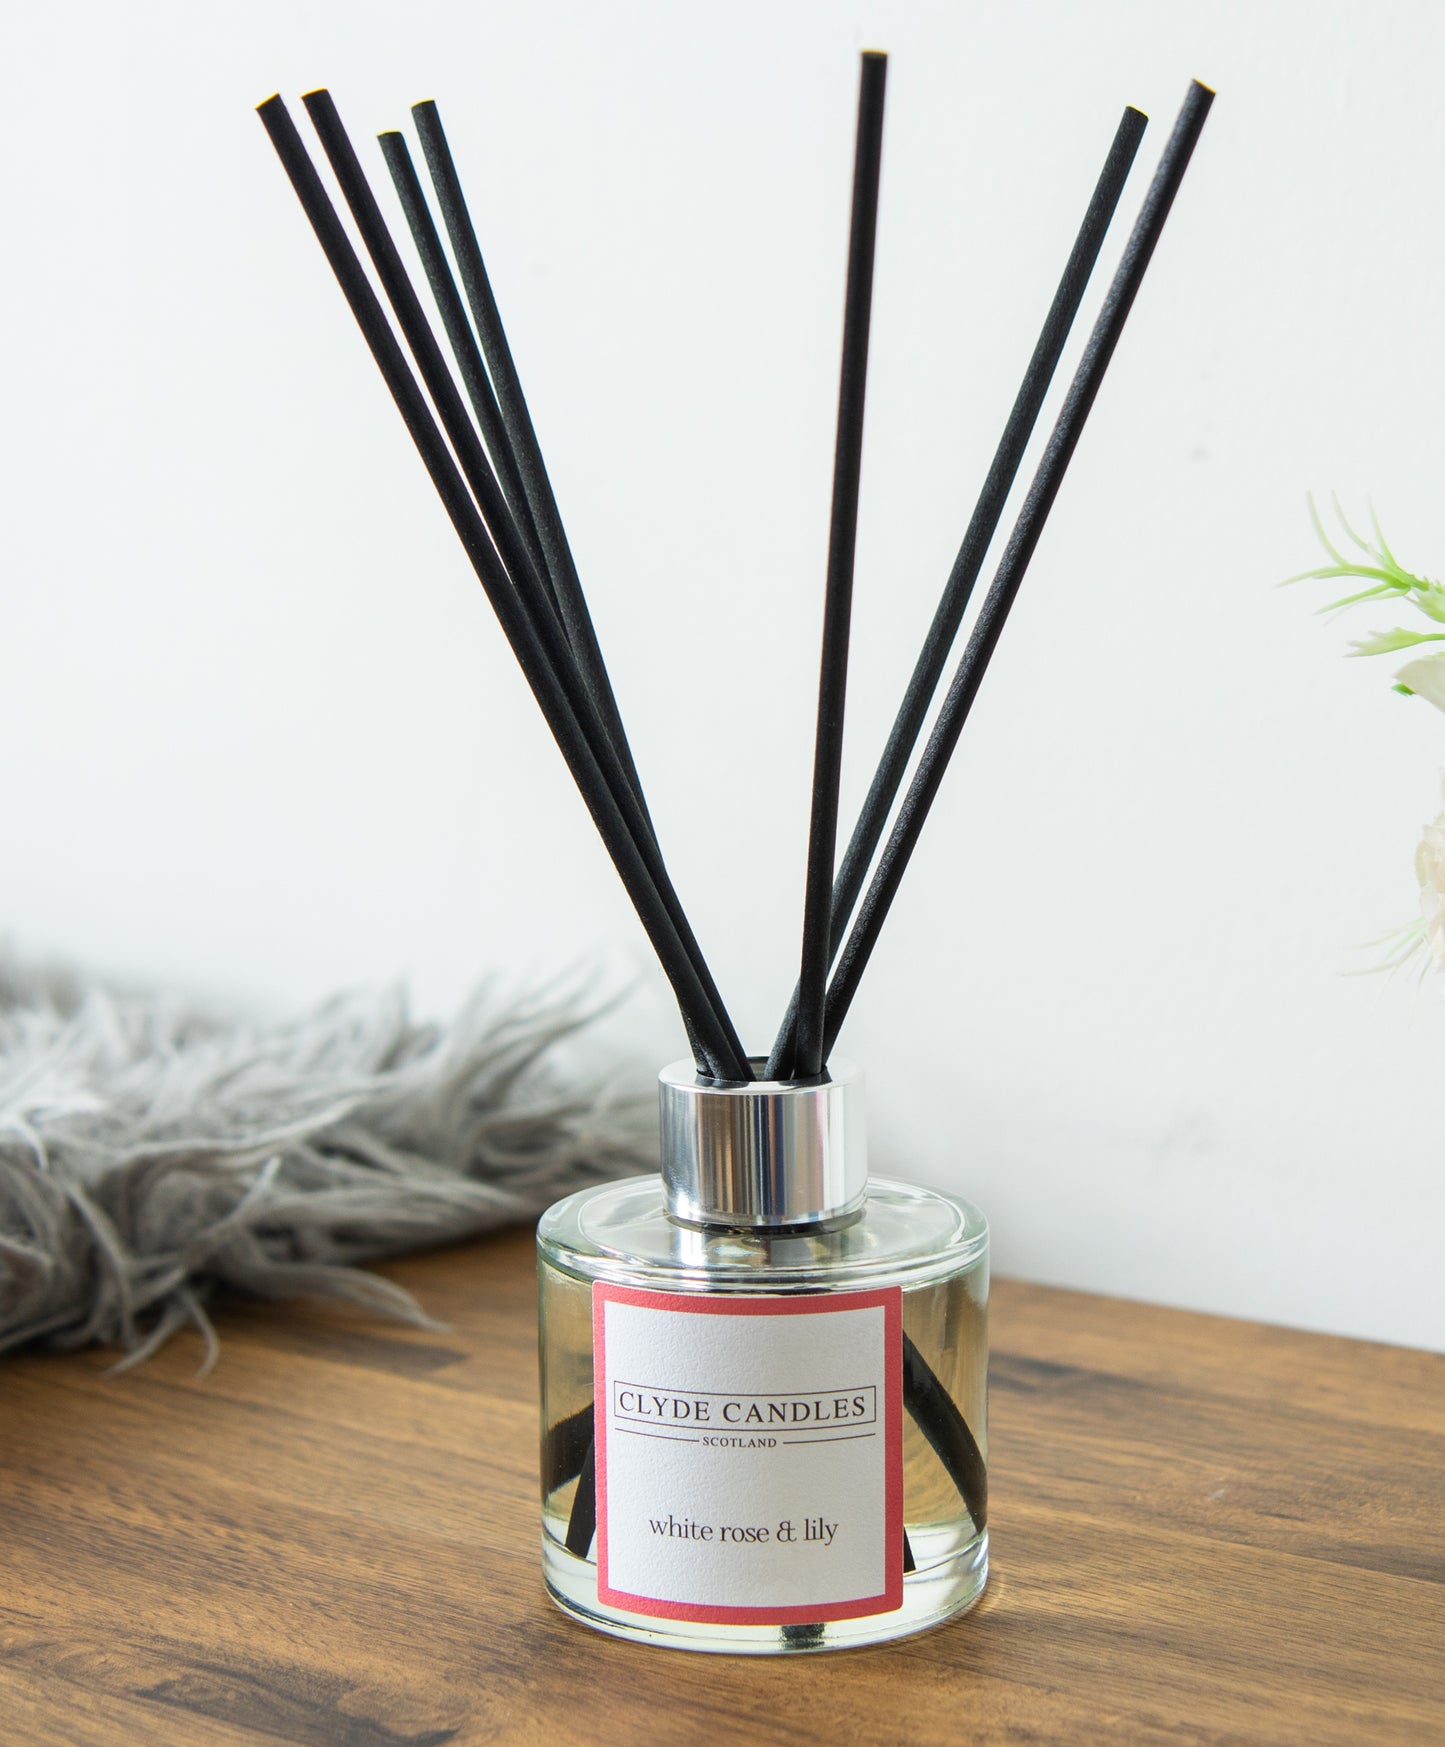 white rose and lily, Reed Diffuser - Clyde Candles, Luxury Diffuser Oil with a Set of 7 Fibre Sticks, 100ml, Best Aroma Scent for Home, Kitchen, Living Room, Bathroom. Fragrance Diffusers set with sticks, fairy dust